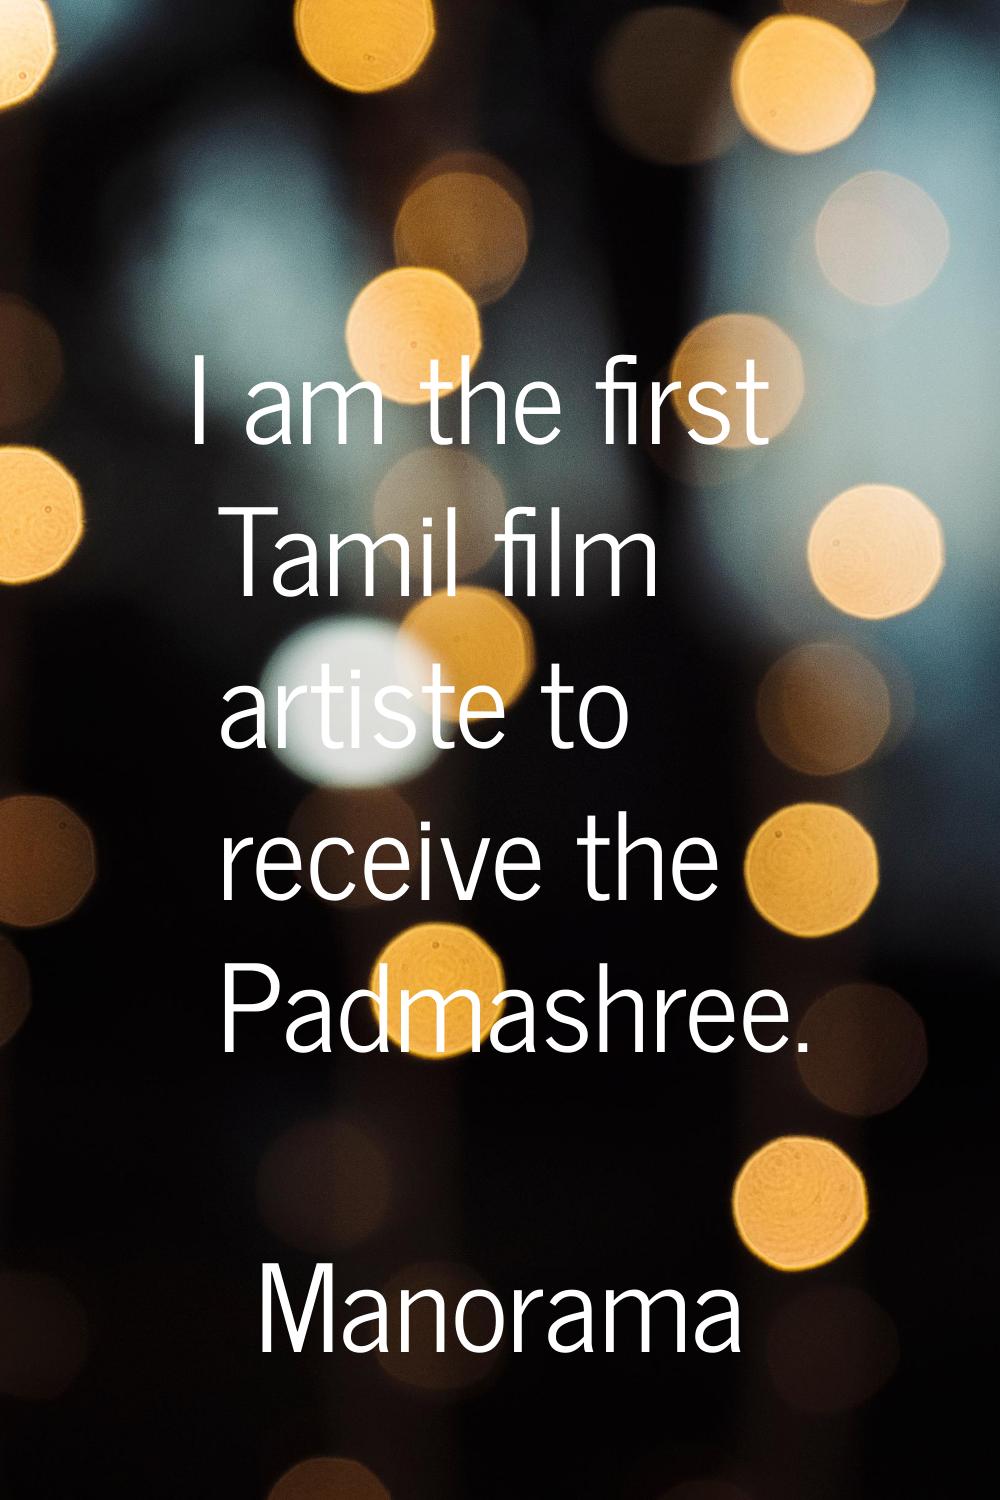 I am the first Tamil film artiste to receive the Padmashree.